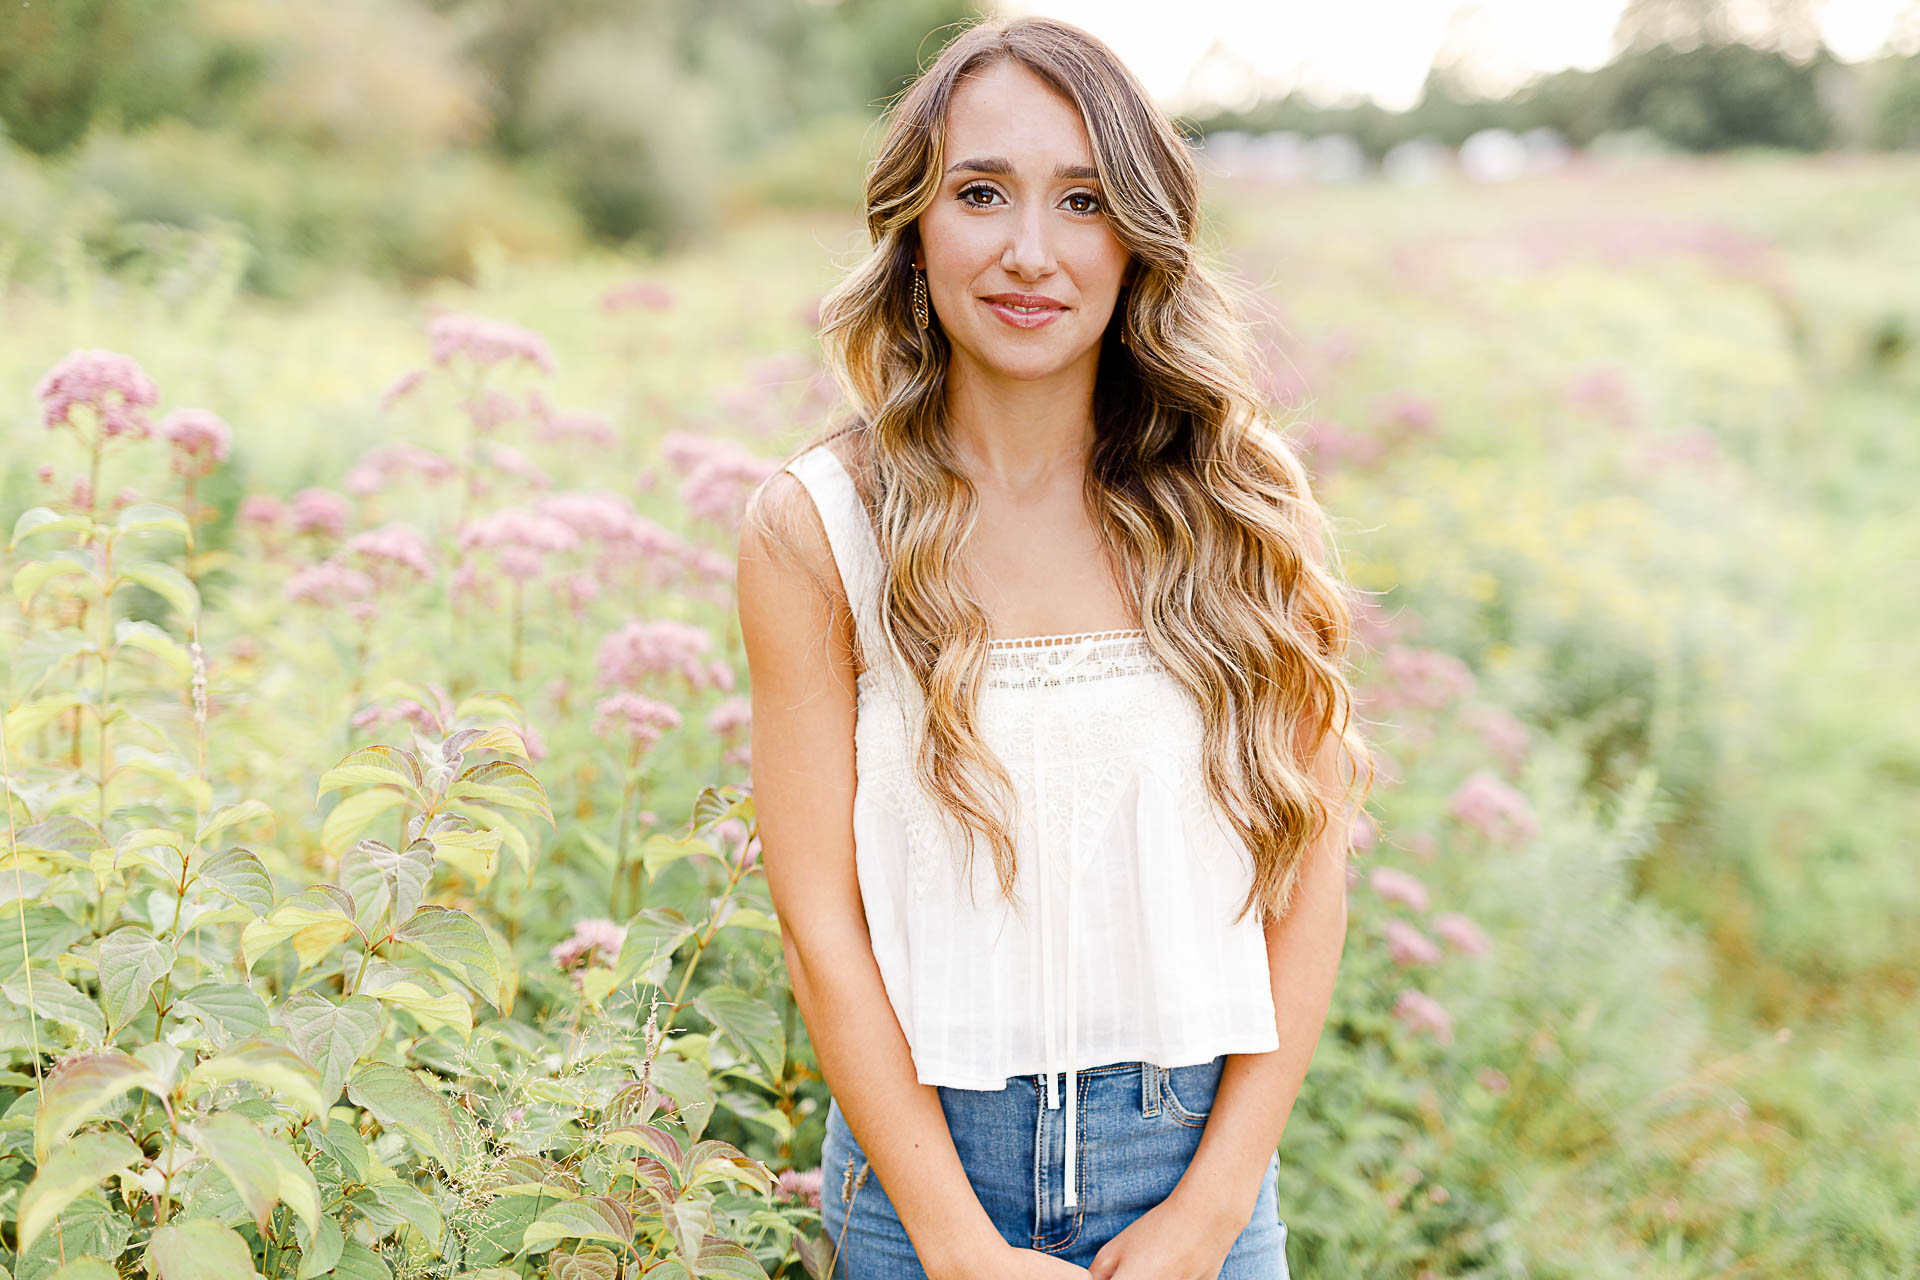 Photo by Kingston Senior Photographer | High school senior girl standing in a wildflower field with purple flowers